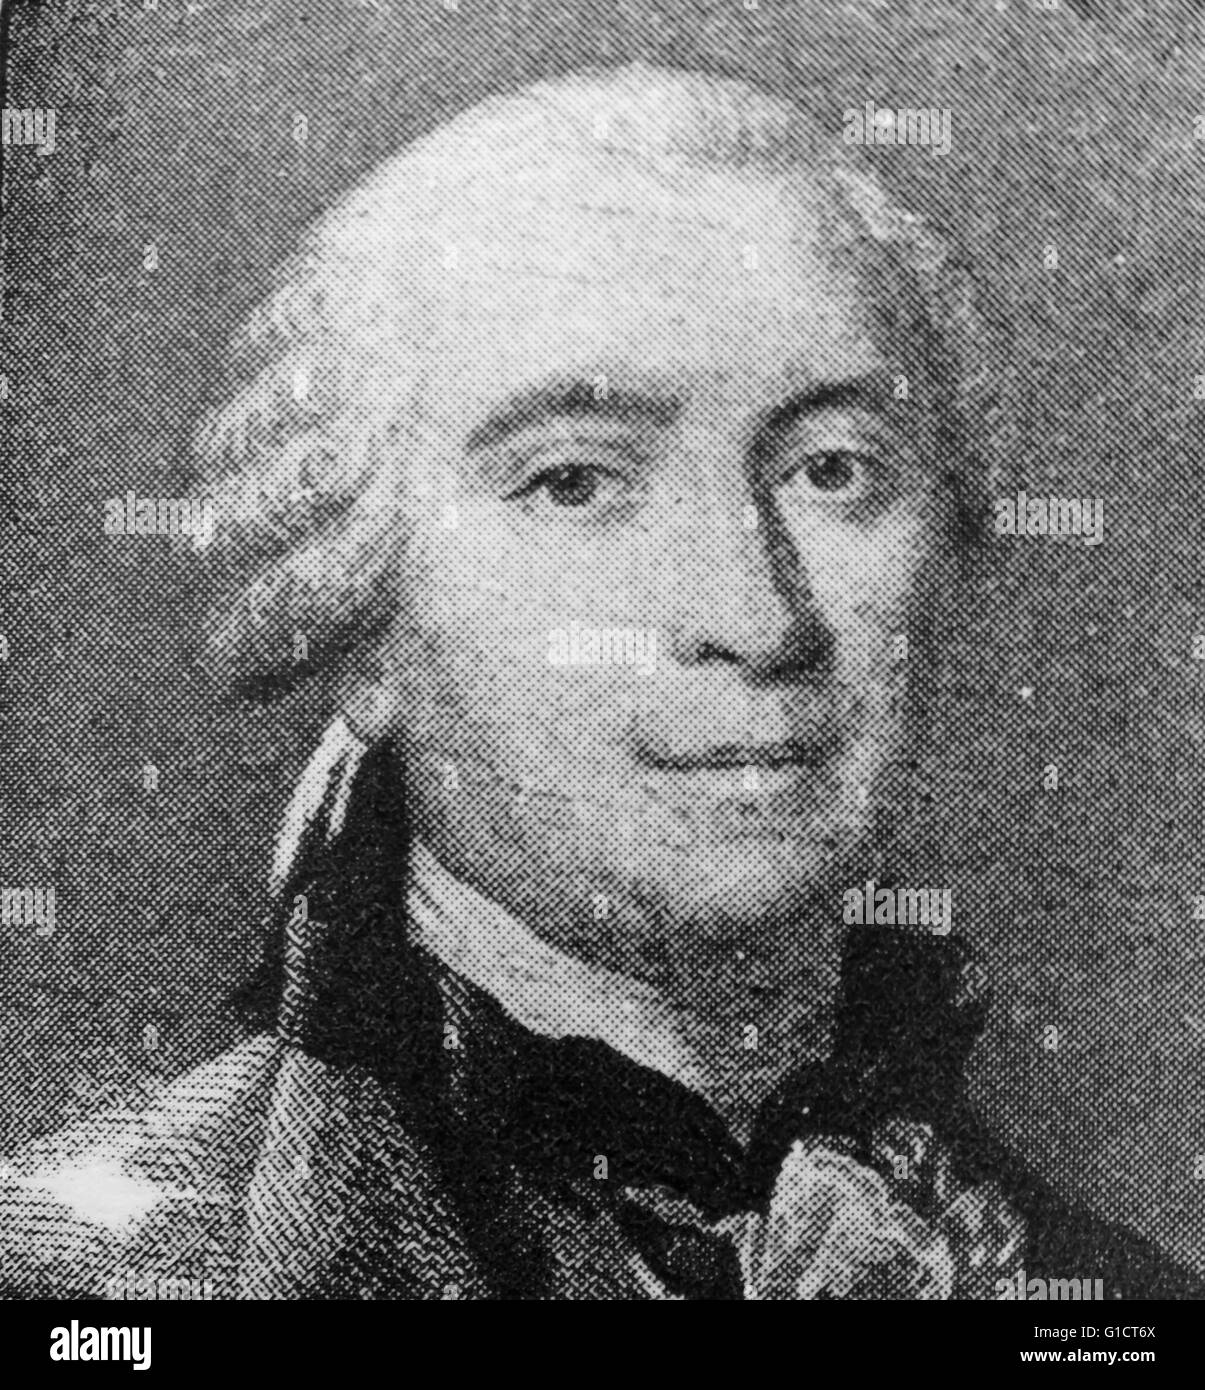 Portrait of Georges-Louis Leclerc, Comte de Buffon (1707-1788) a French naturalist, mathematician, cosmologist, and encyclopaedic author. Dated 18th Century Stock Photo